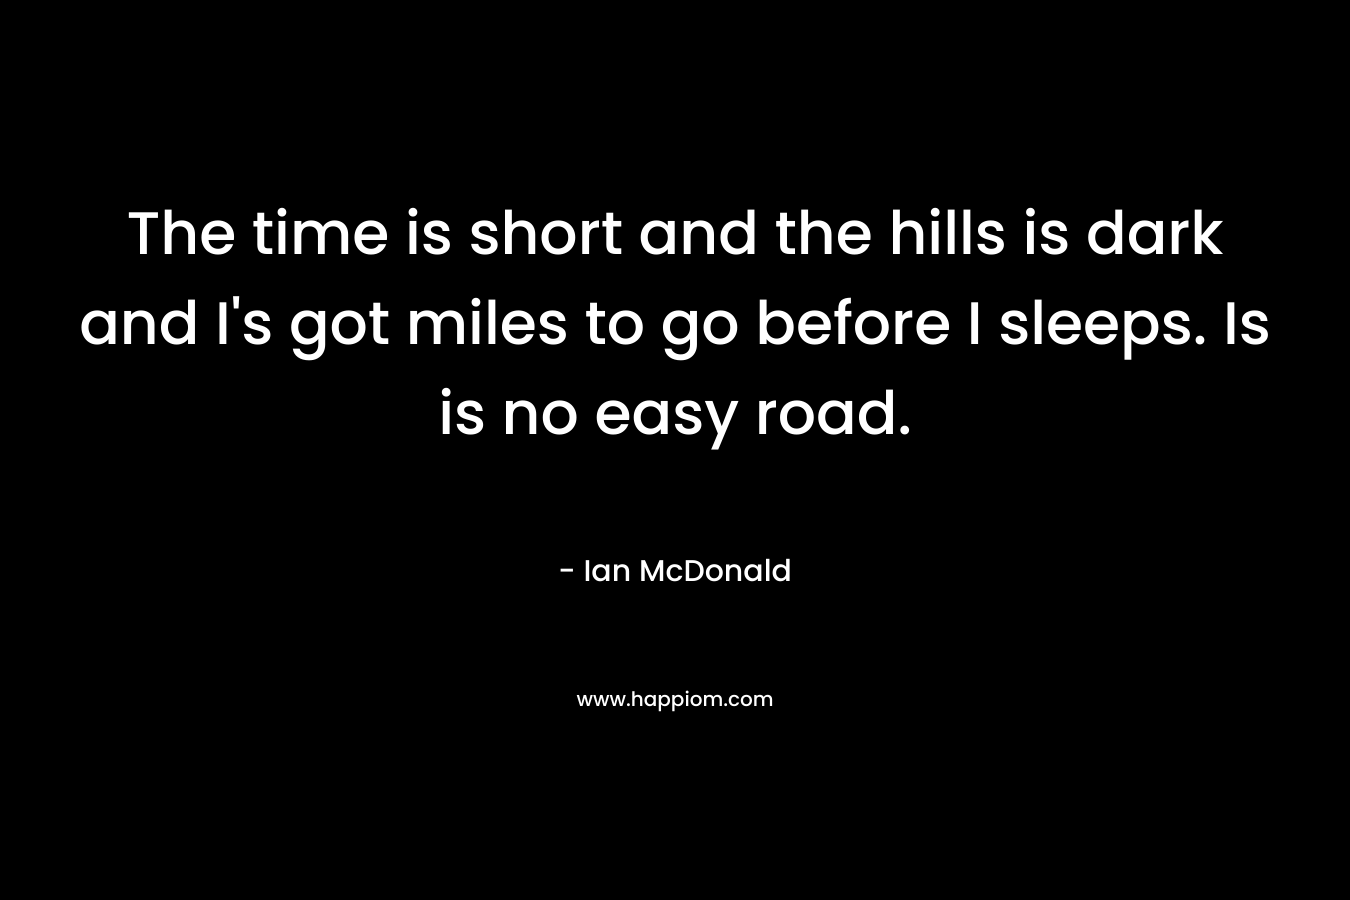 The time is short and the hills is dark and I's got miles to go before I sleeps. Is is no easy road.